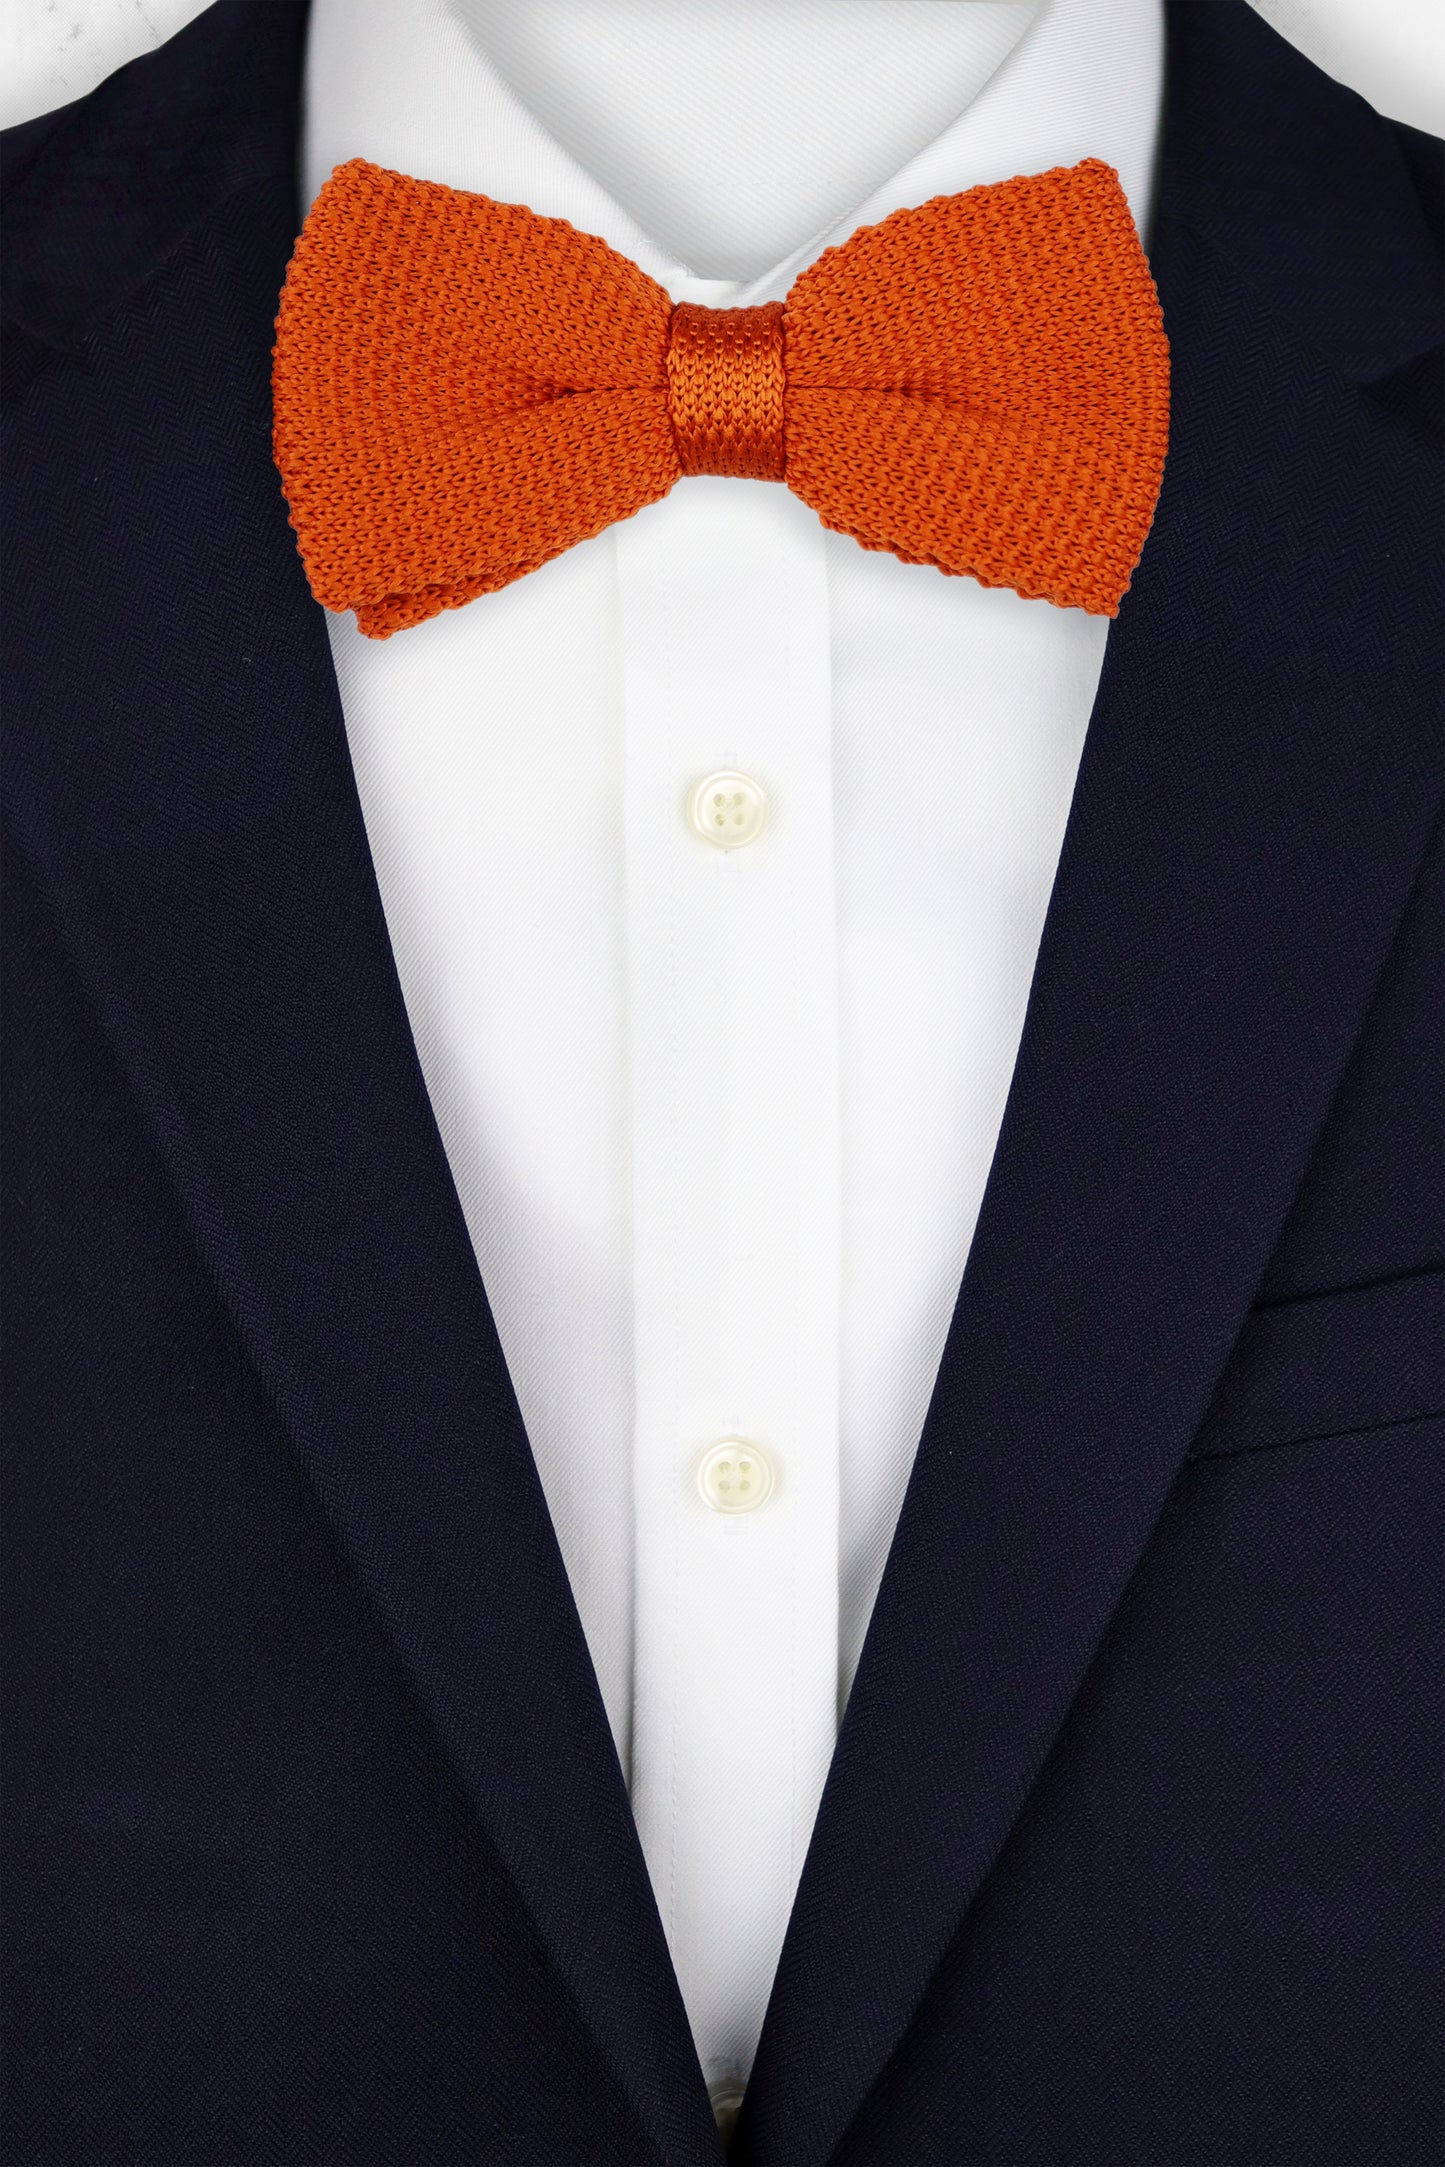 100% Polyester Diamond End Knitted Tie - Orange